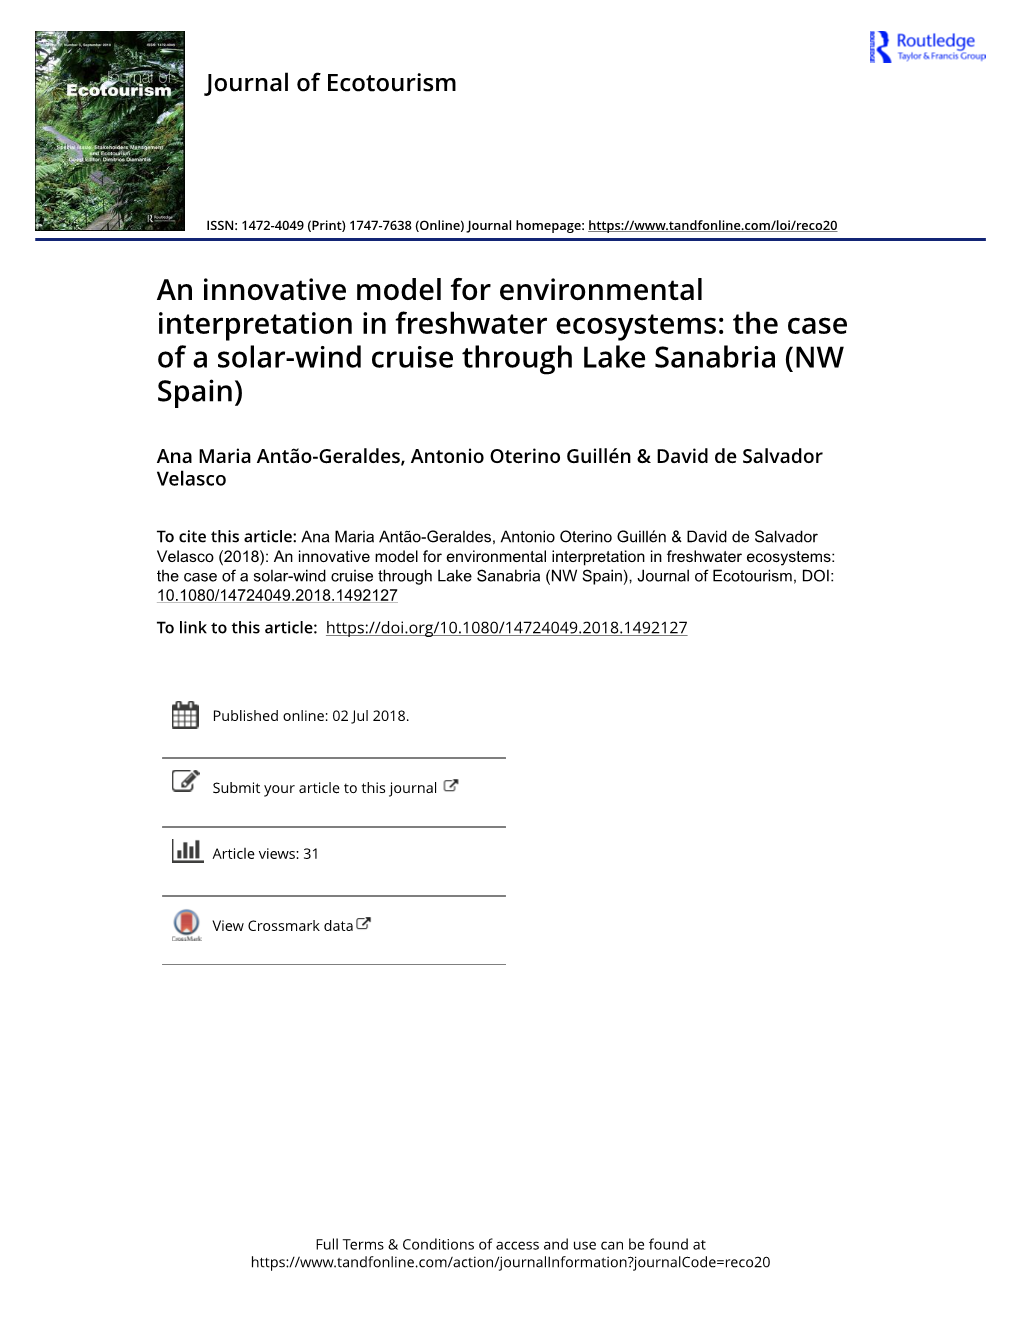 An Innovative Model for Environmental Interpretation in Freshwater Ecosystems: the Case of a Solar-Wind Cruise Through Lake Sanabria (NW Spain)